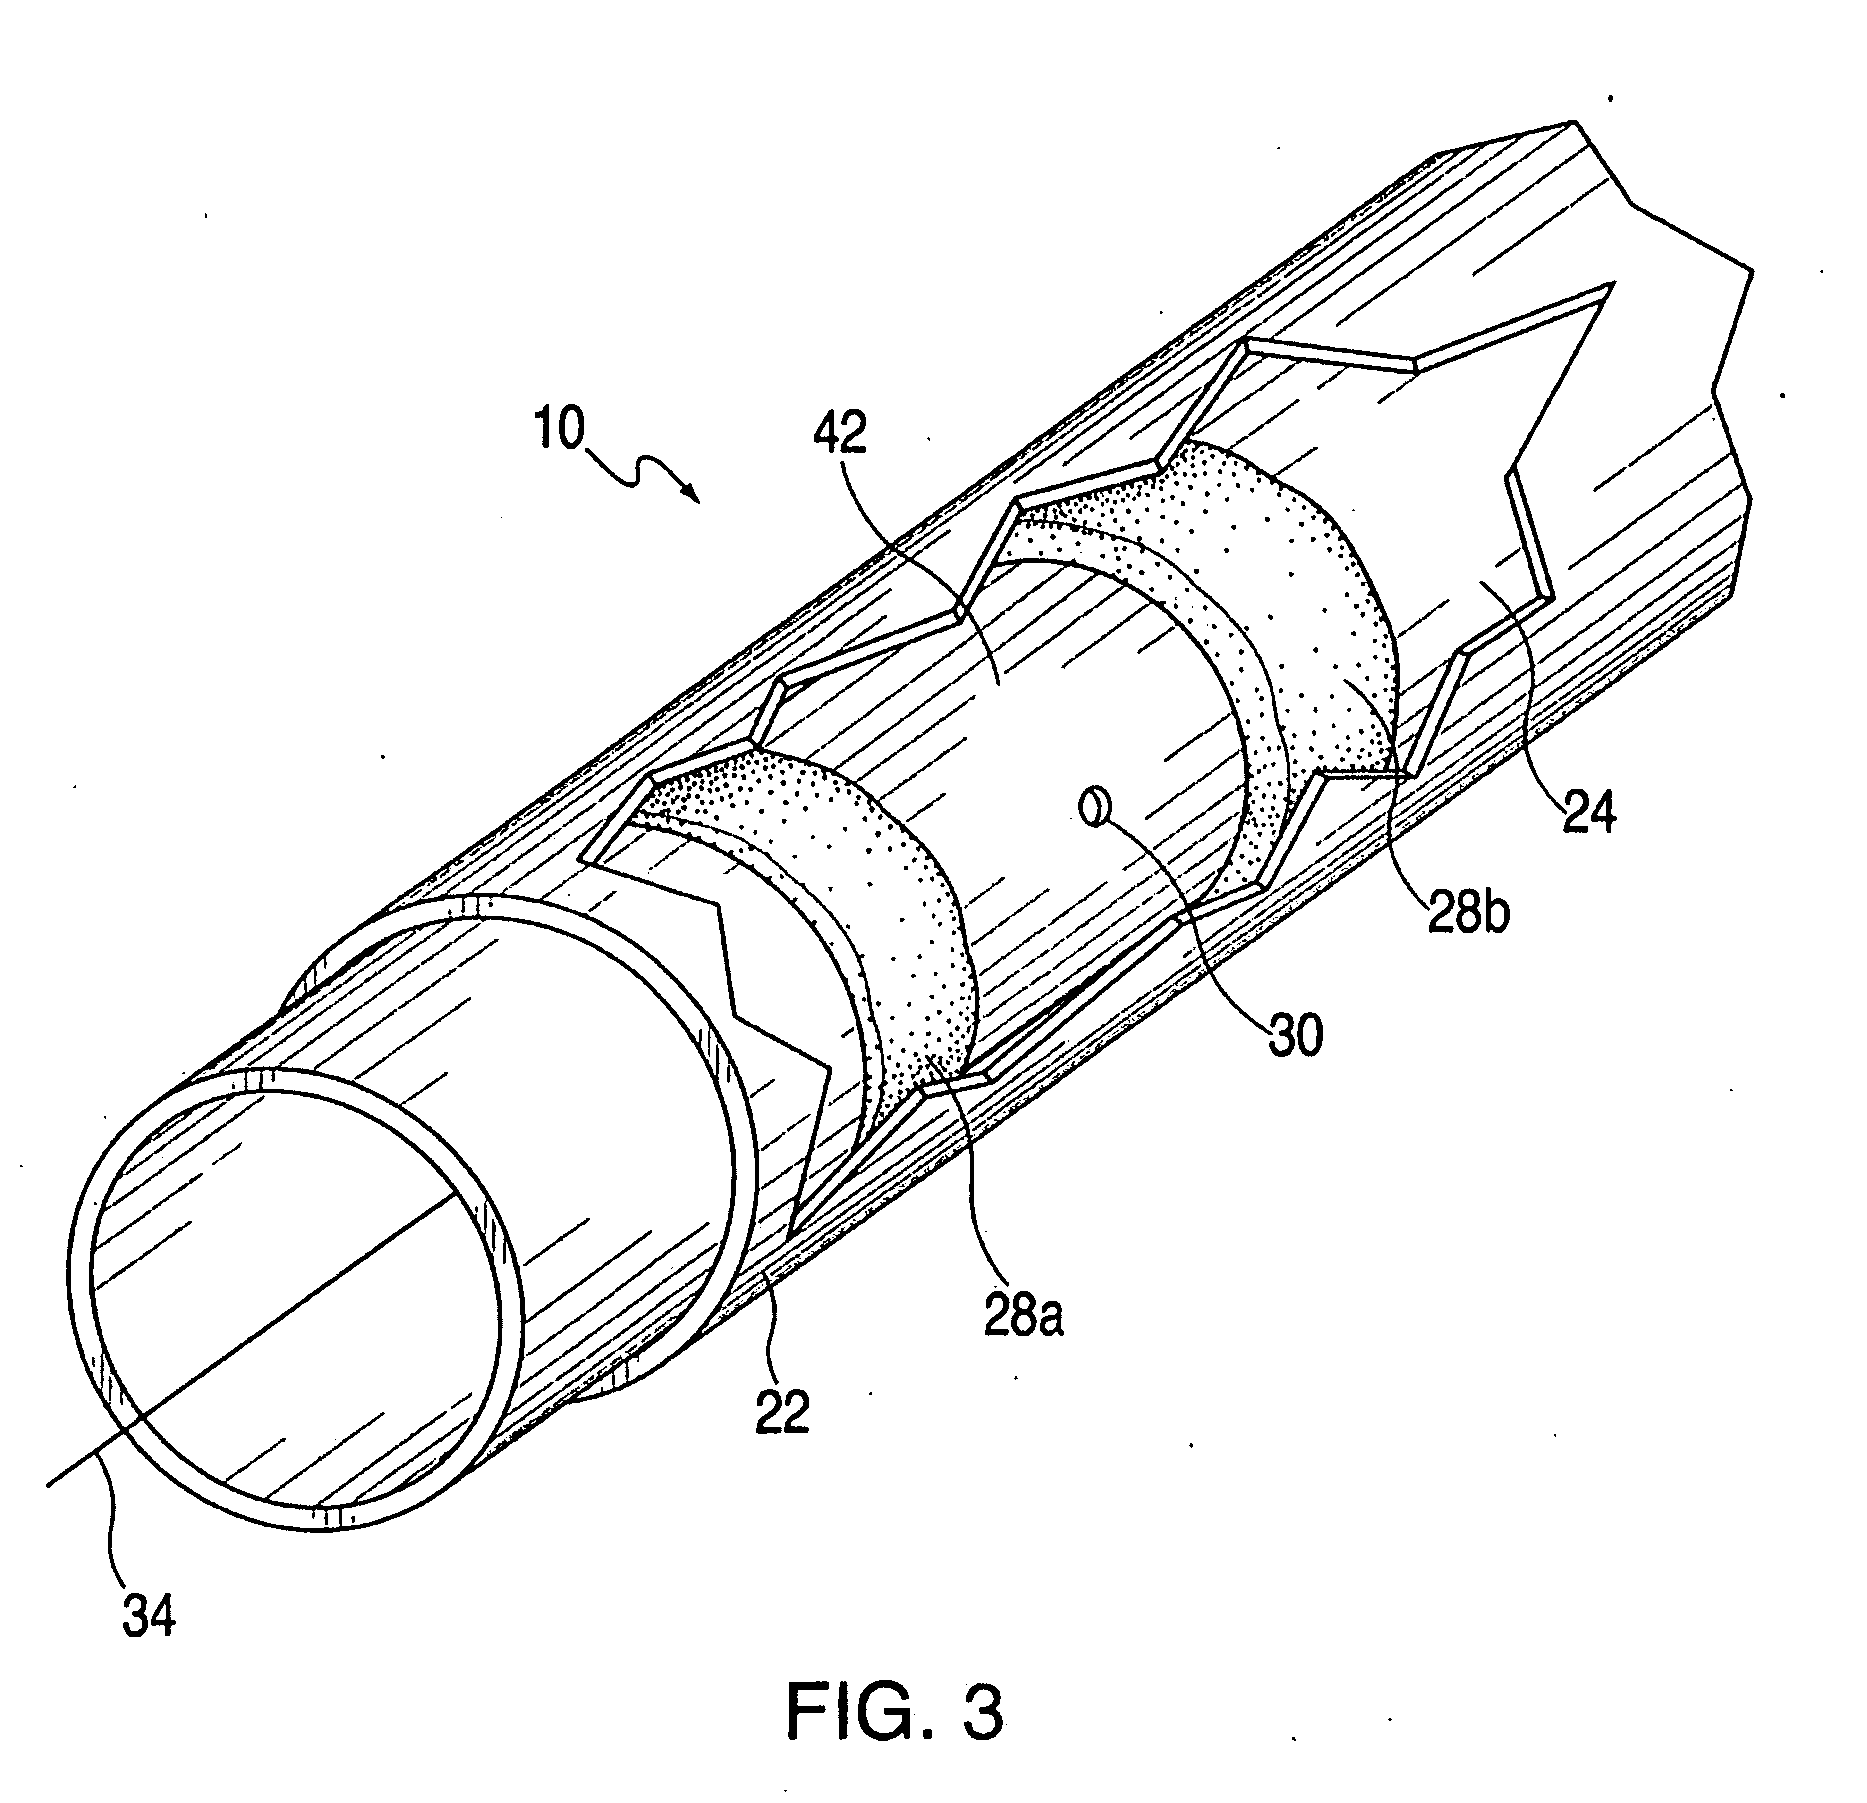 Catheter-based septal occlusion device and adhesive delivery system